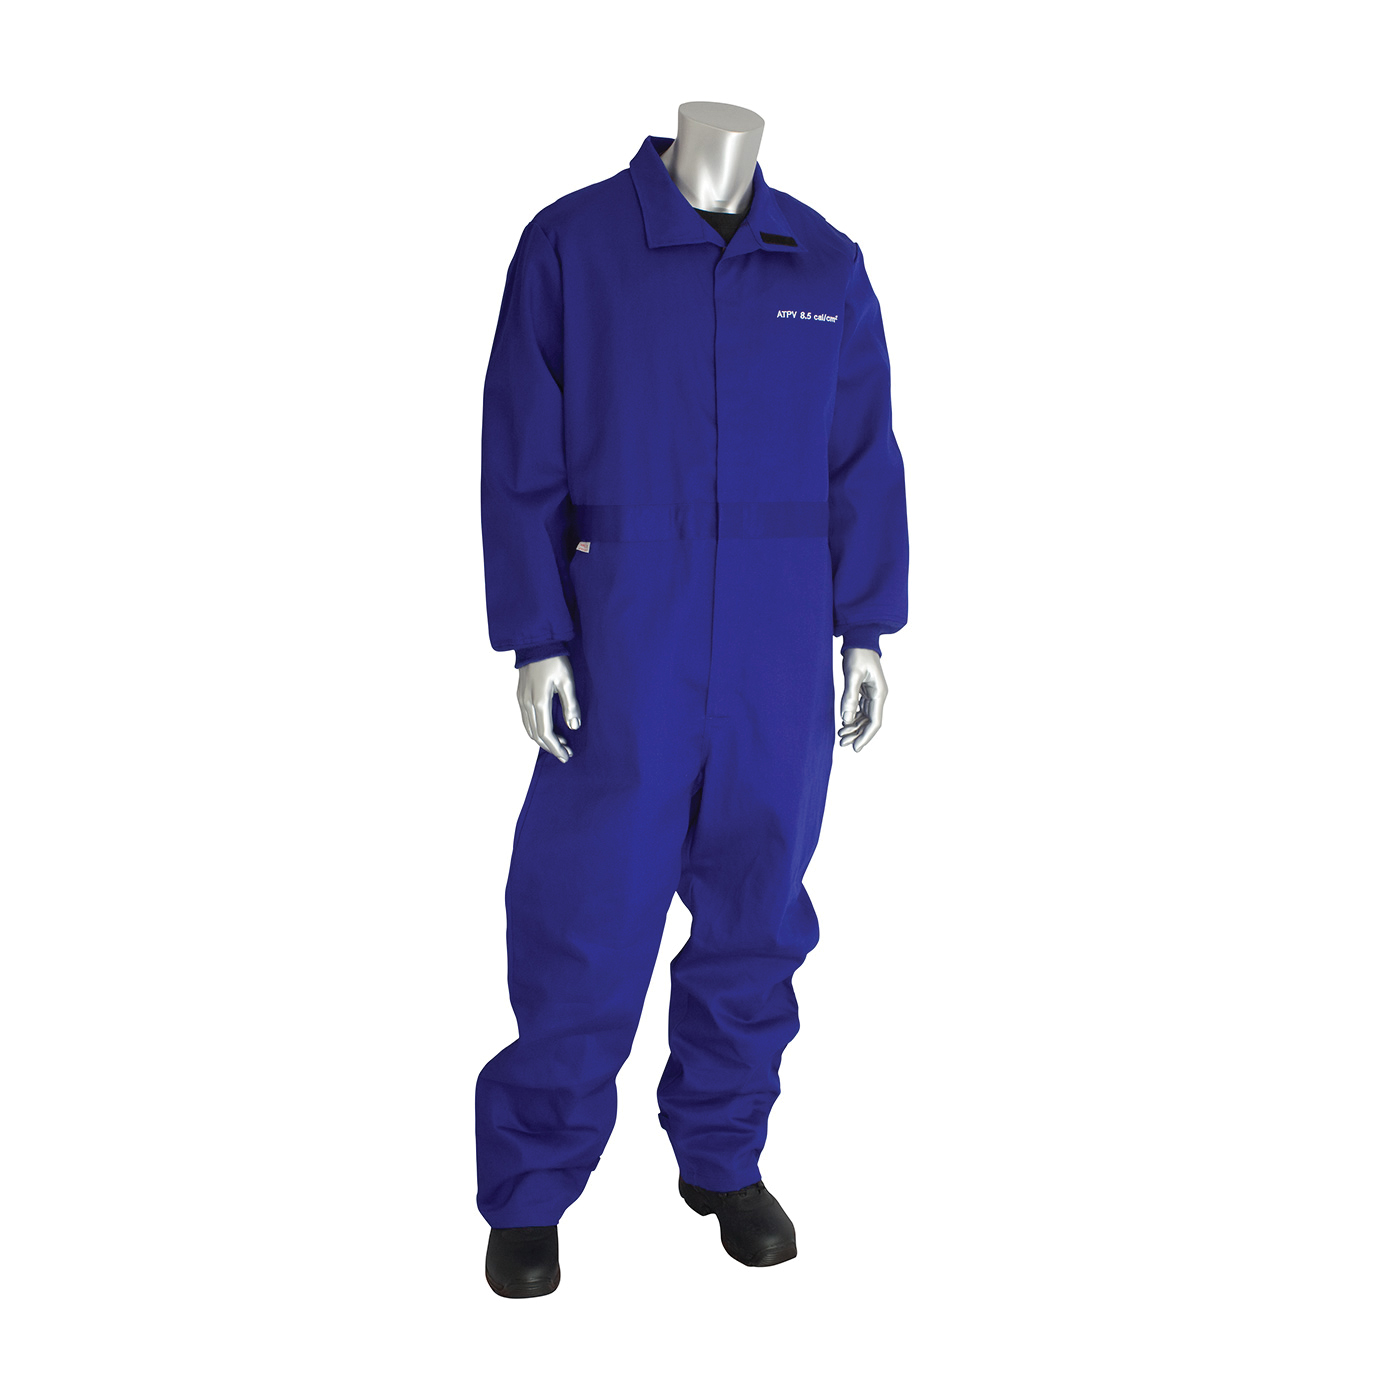 PIP® 9100-2120D/XL Flame Resistant Coverall With Vented Back, XL, Royal Blue, 90% Cotton/10% Nylon/FR Twill Weave, 48 to 50 in Chest, 32 in L Inseam